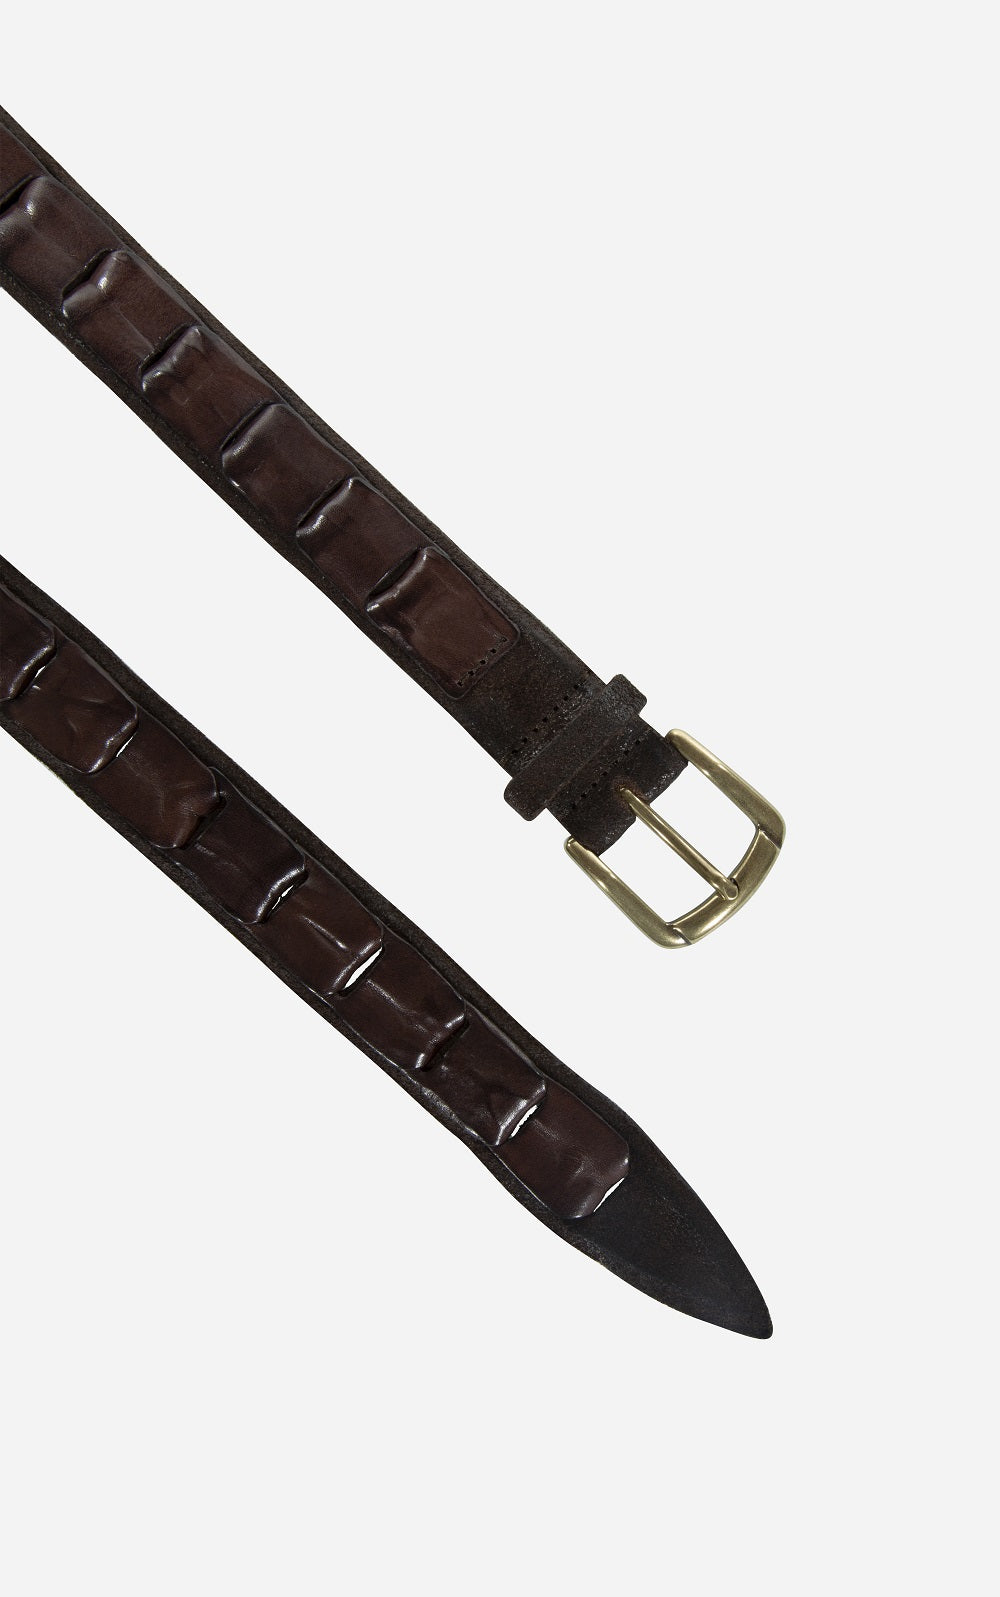 Zante suede leather belt with smooth leather inserts